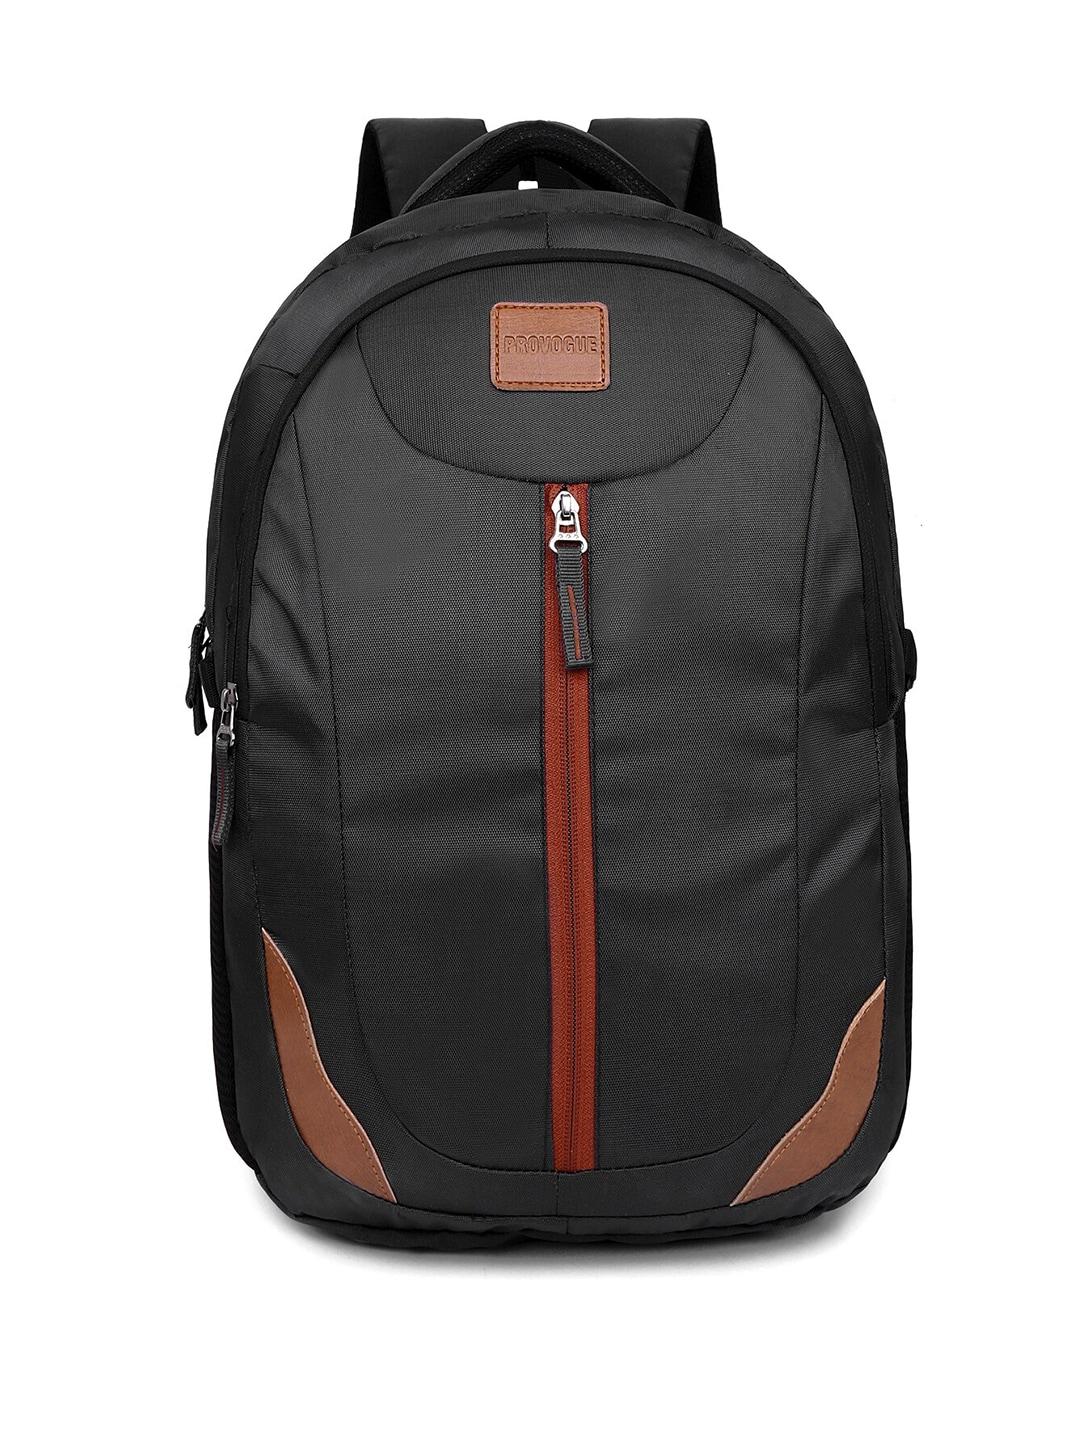 Provogue Unisex Textured Backpack